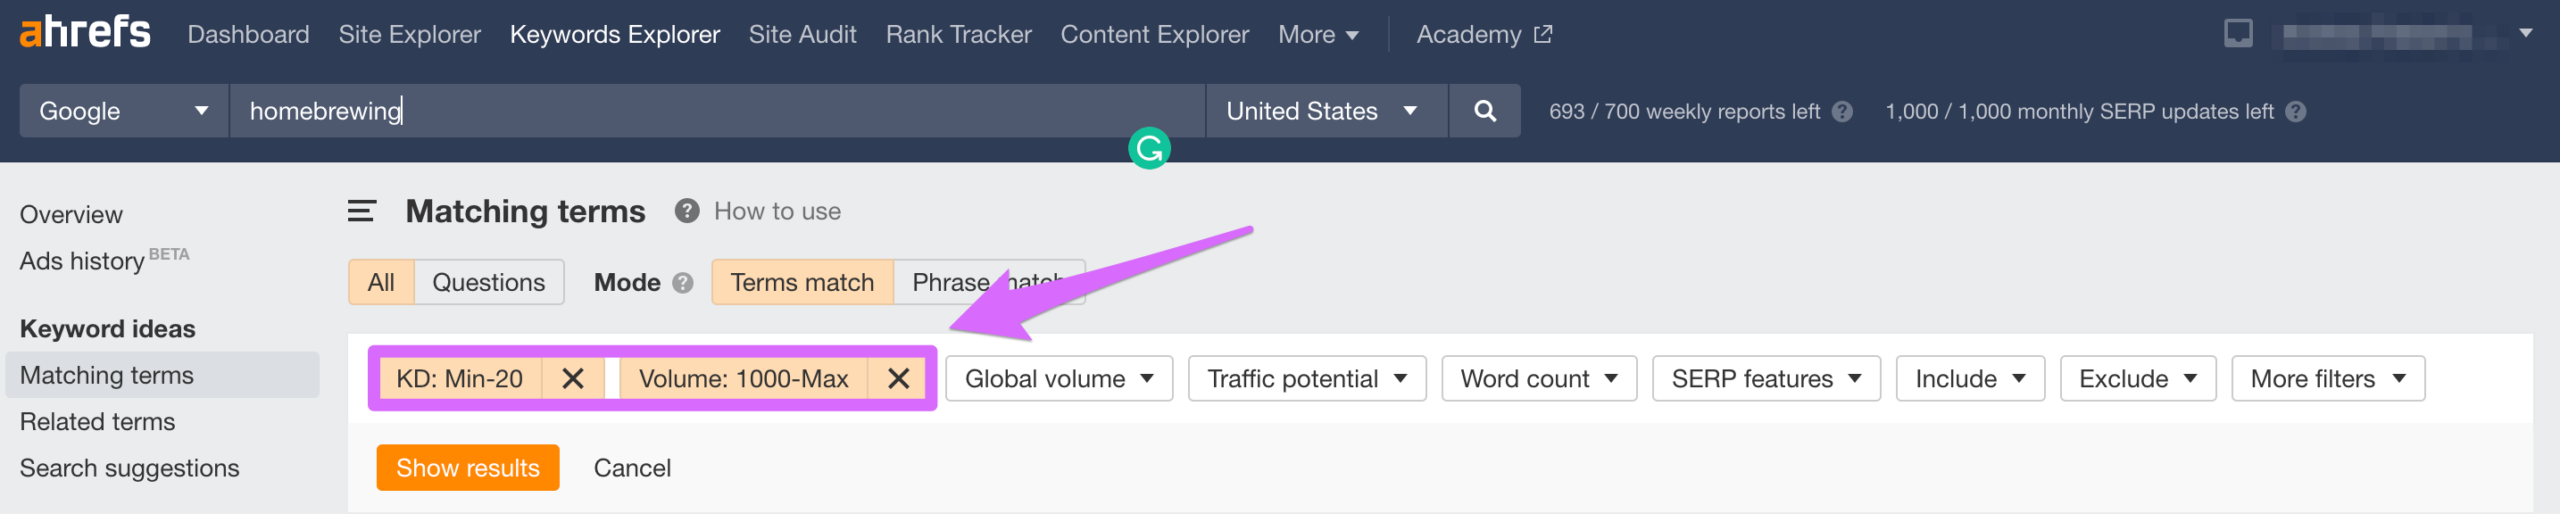 setting keyword filters and search volume filters in ahrefs